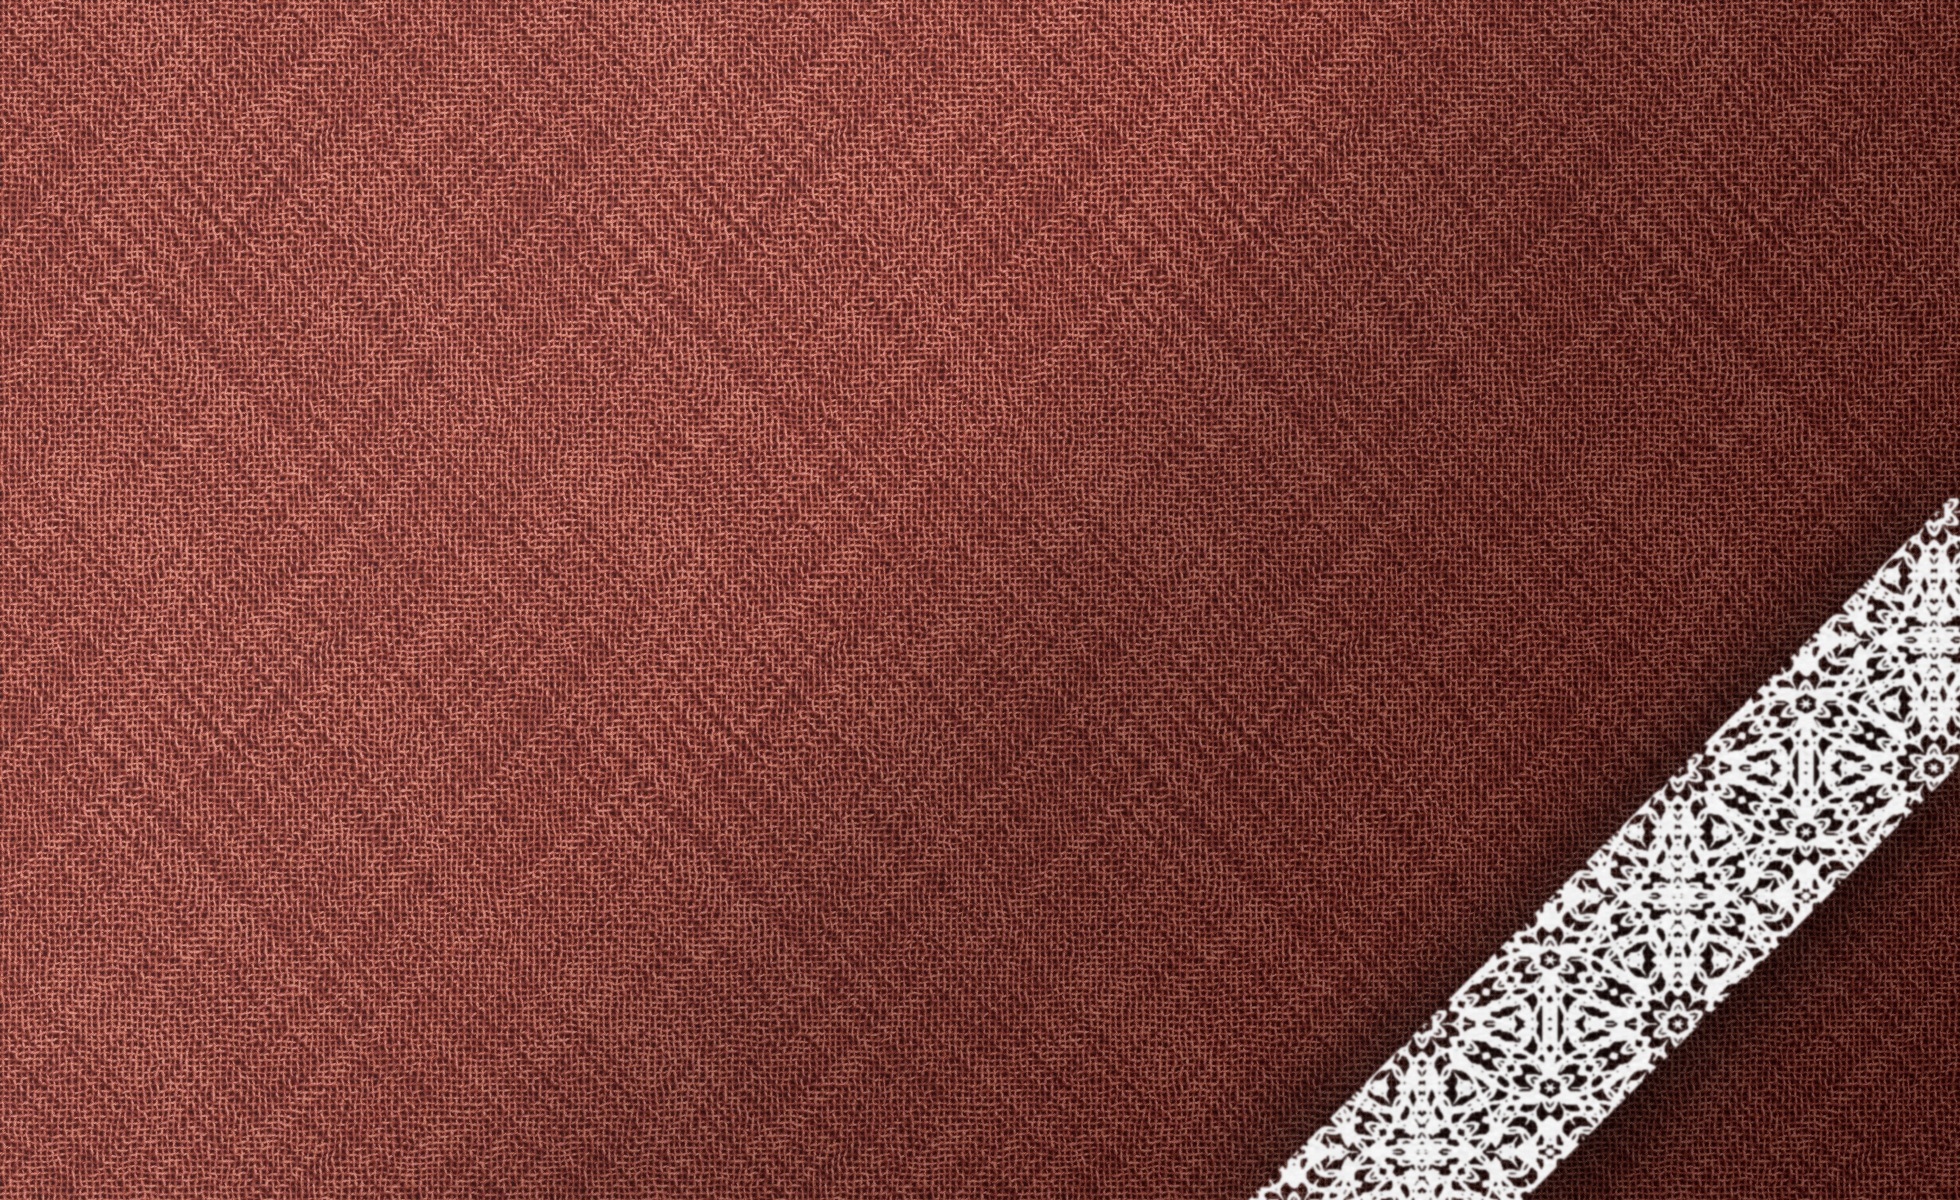 Texture Background Cloth Burgundy Brown White Lace Wallpaper